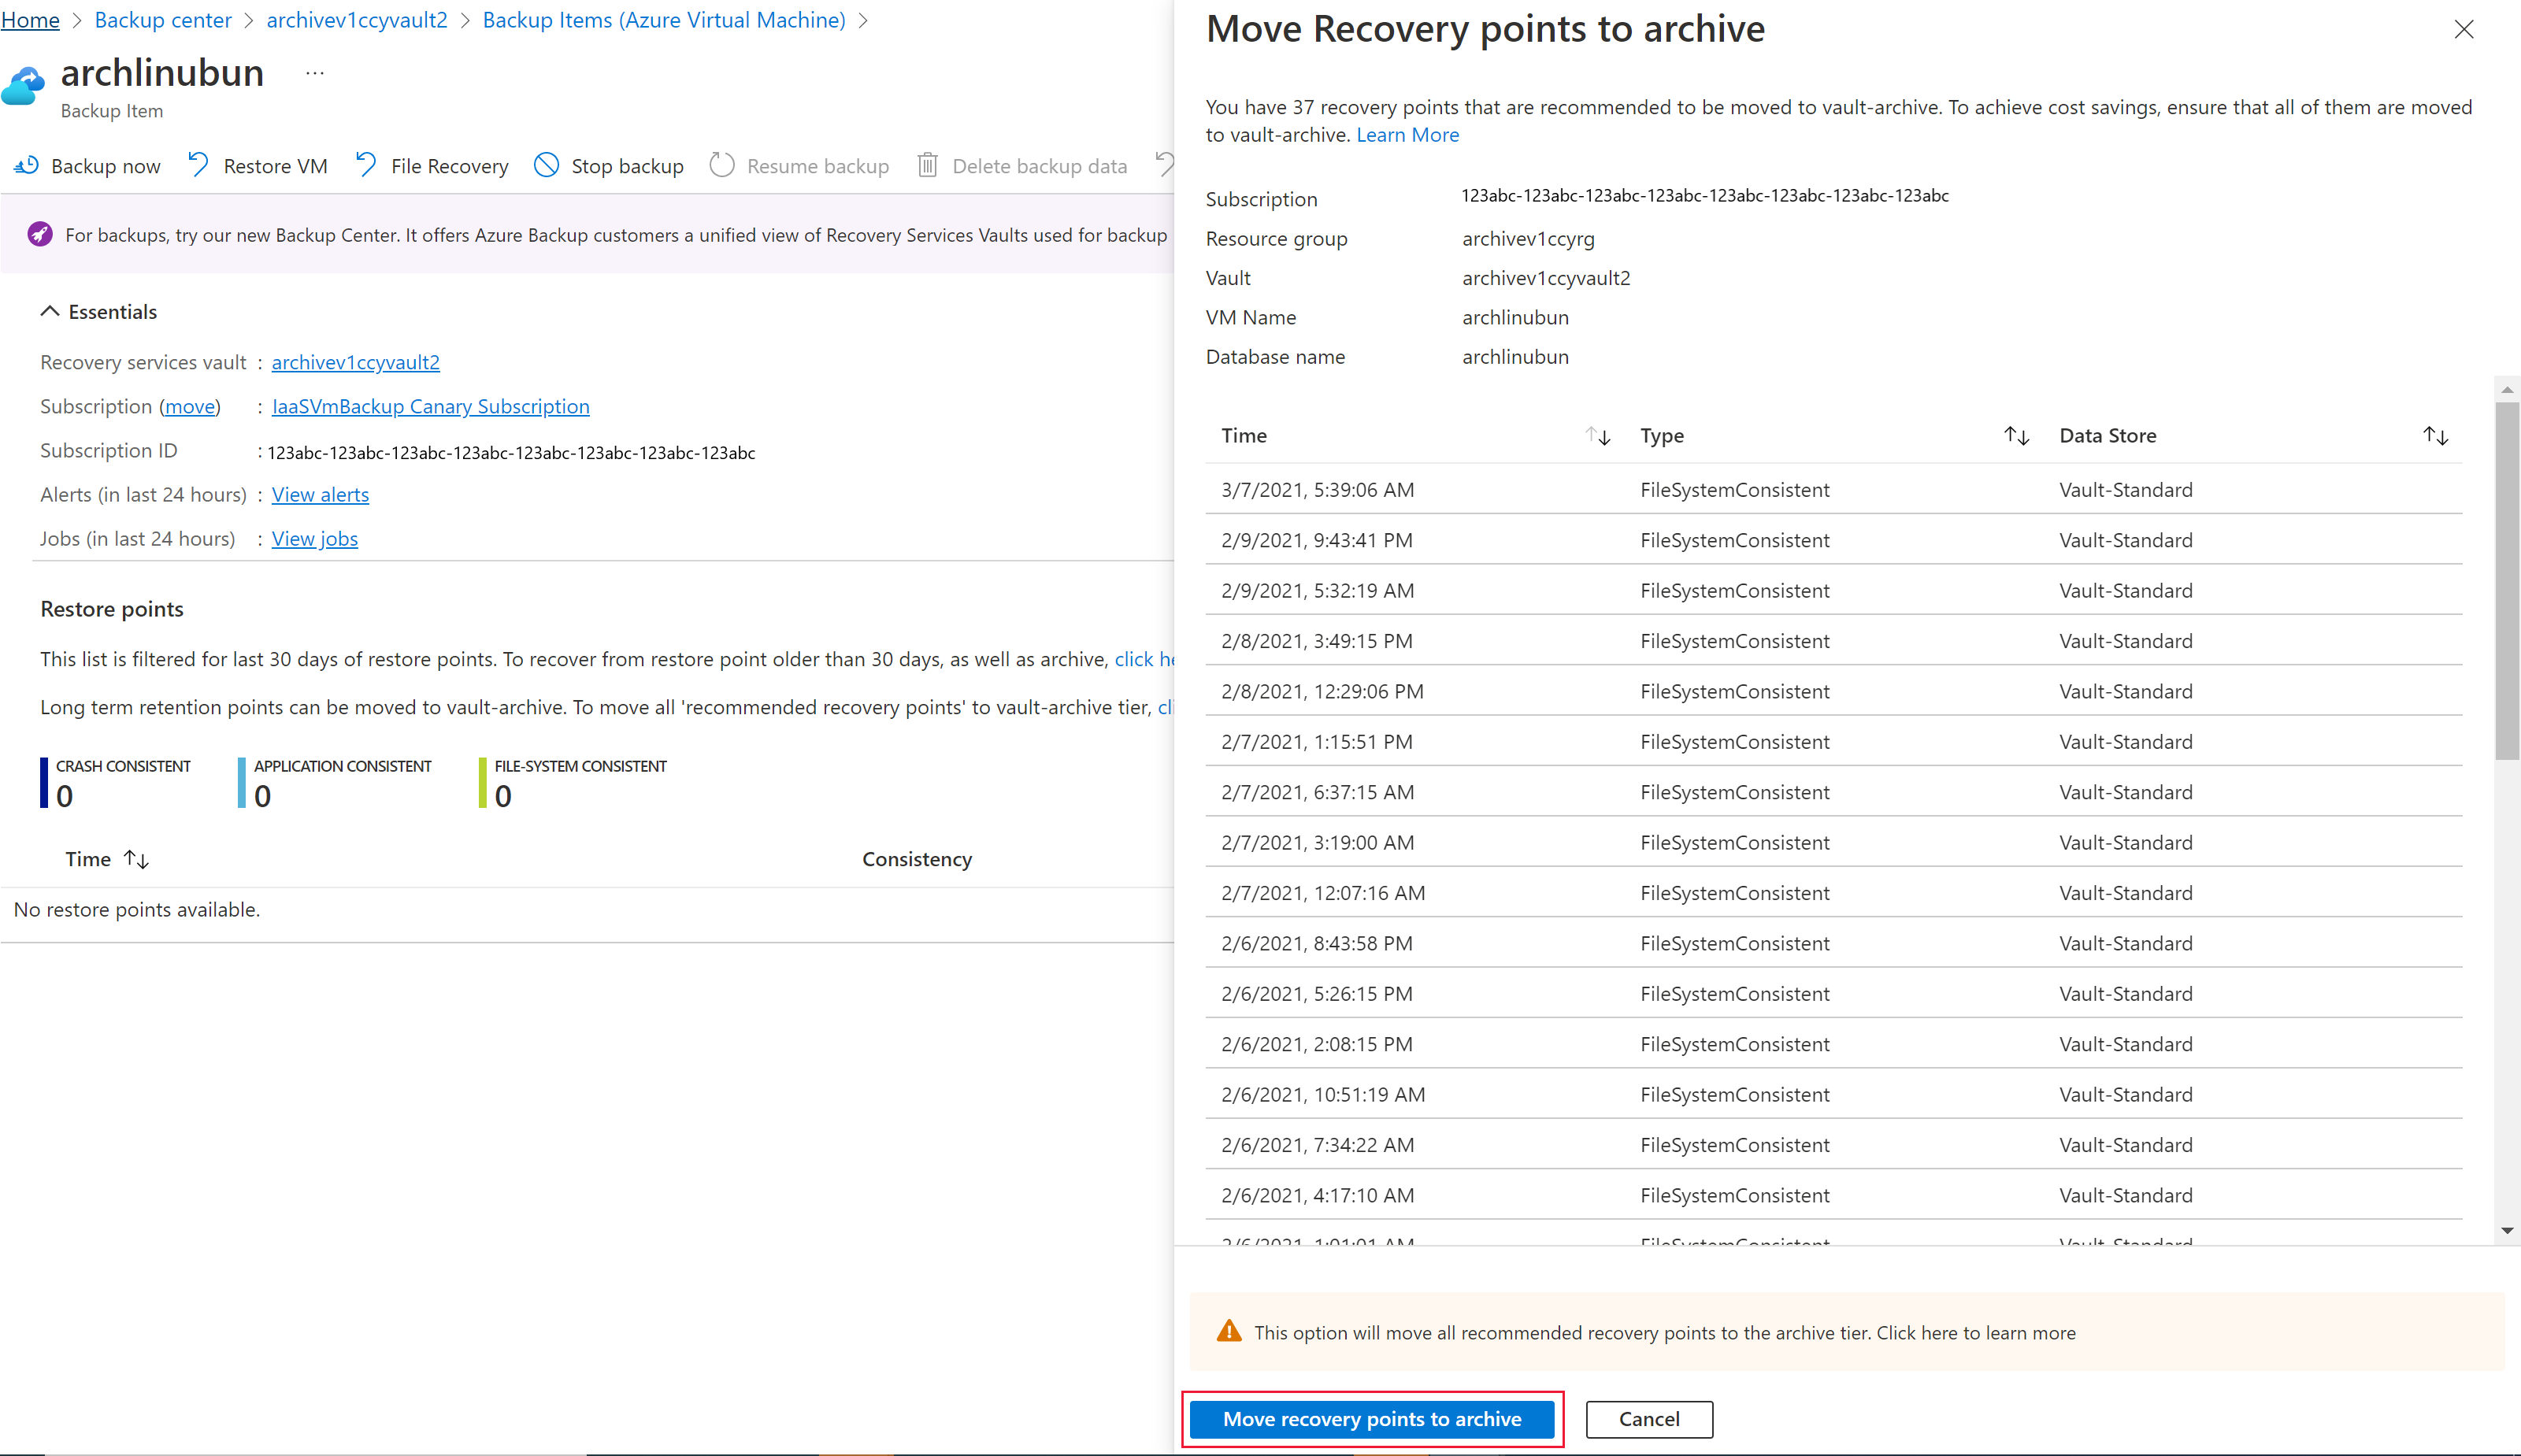 Screenshot showing the option to start the move process of all recovery points for virtual machines to the Vault-archive tier.